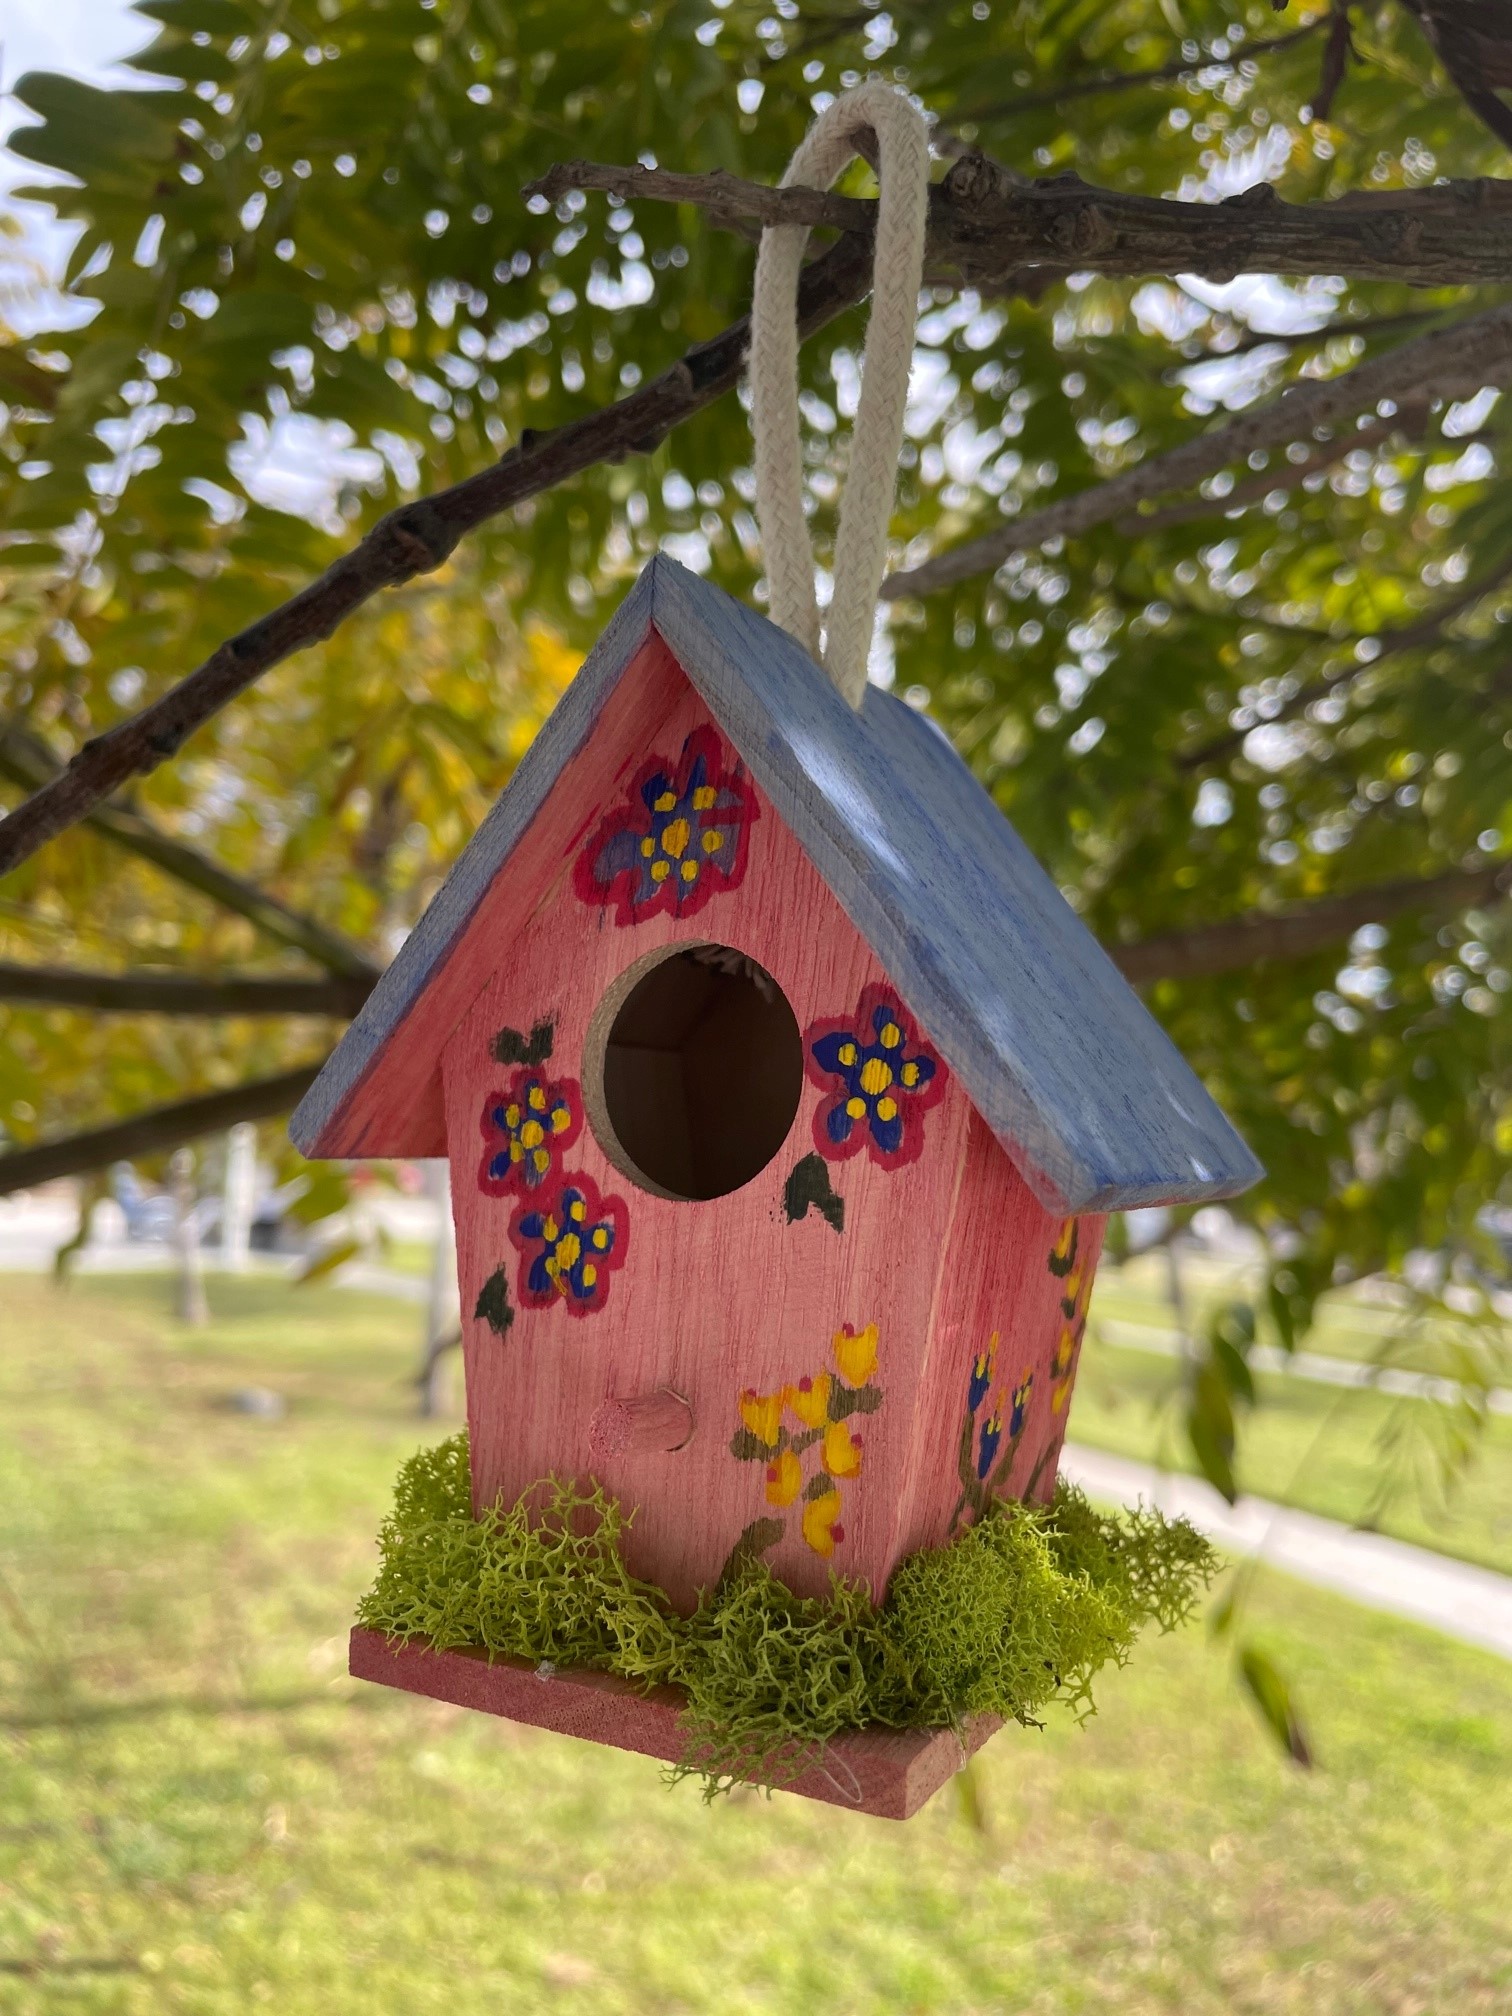 Miniature wooden birdhouse, hanging in a tree